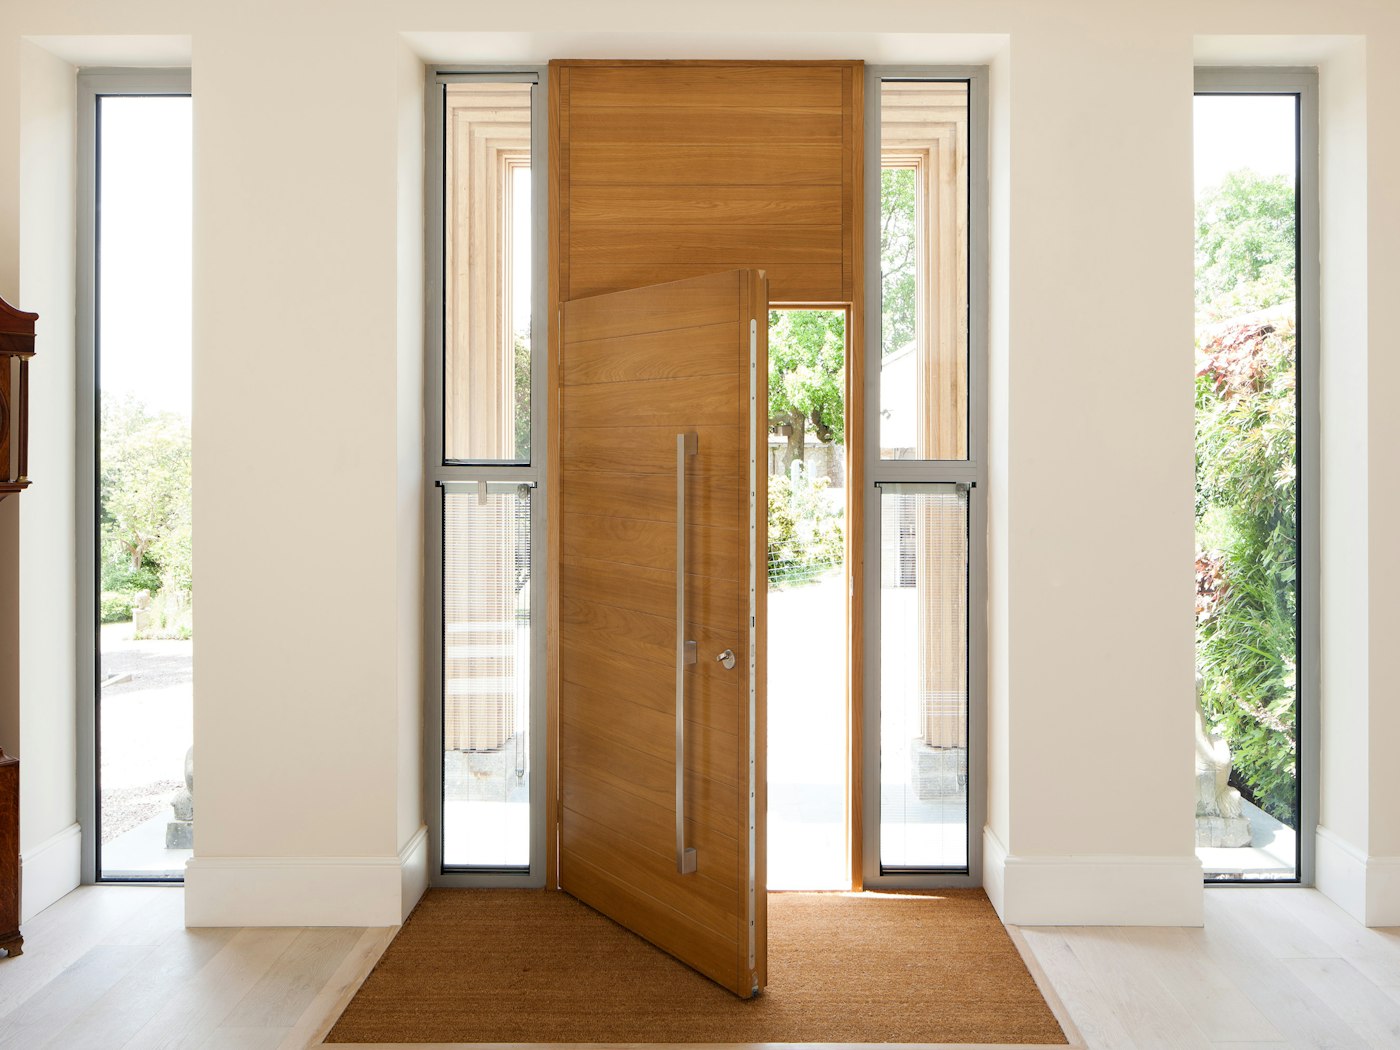 The door provides functionality but doesn't compromise on style